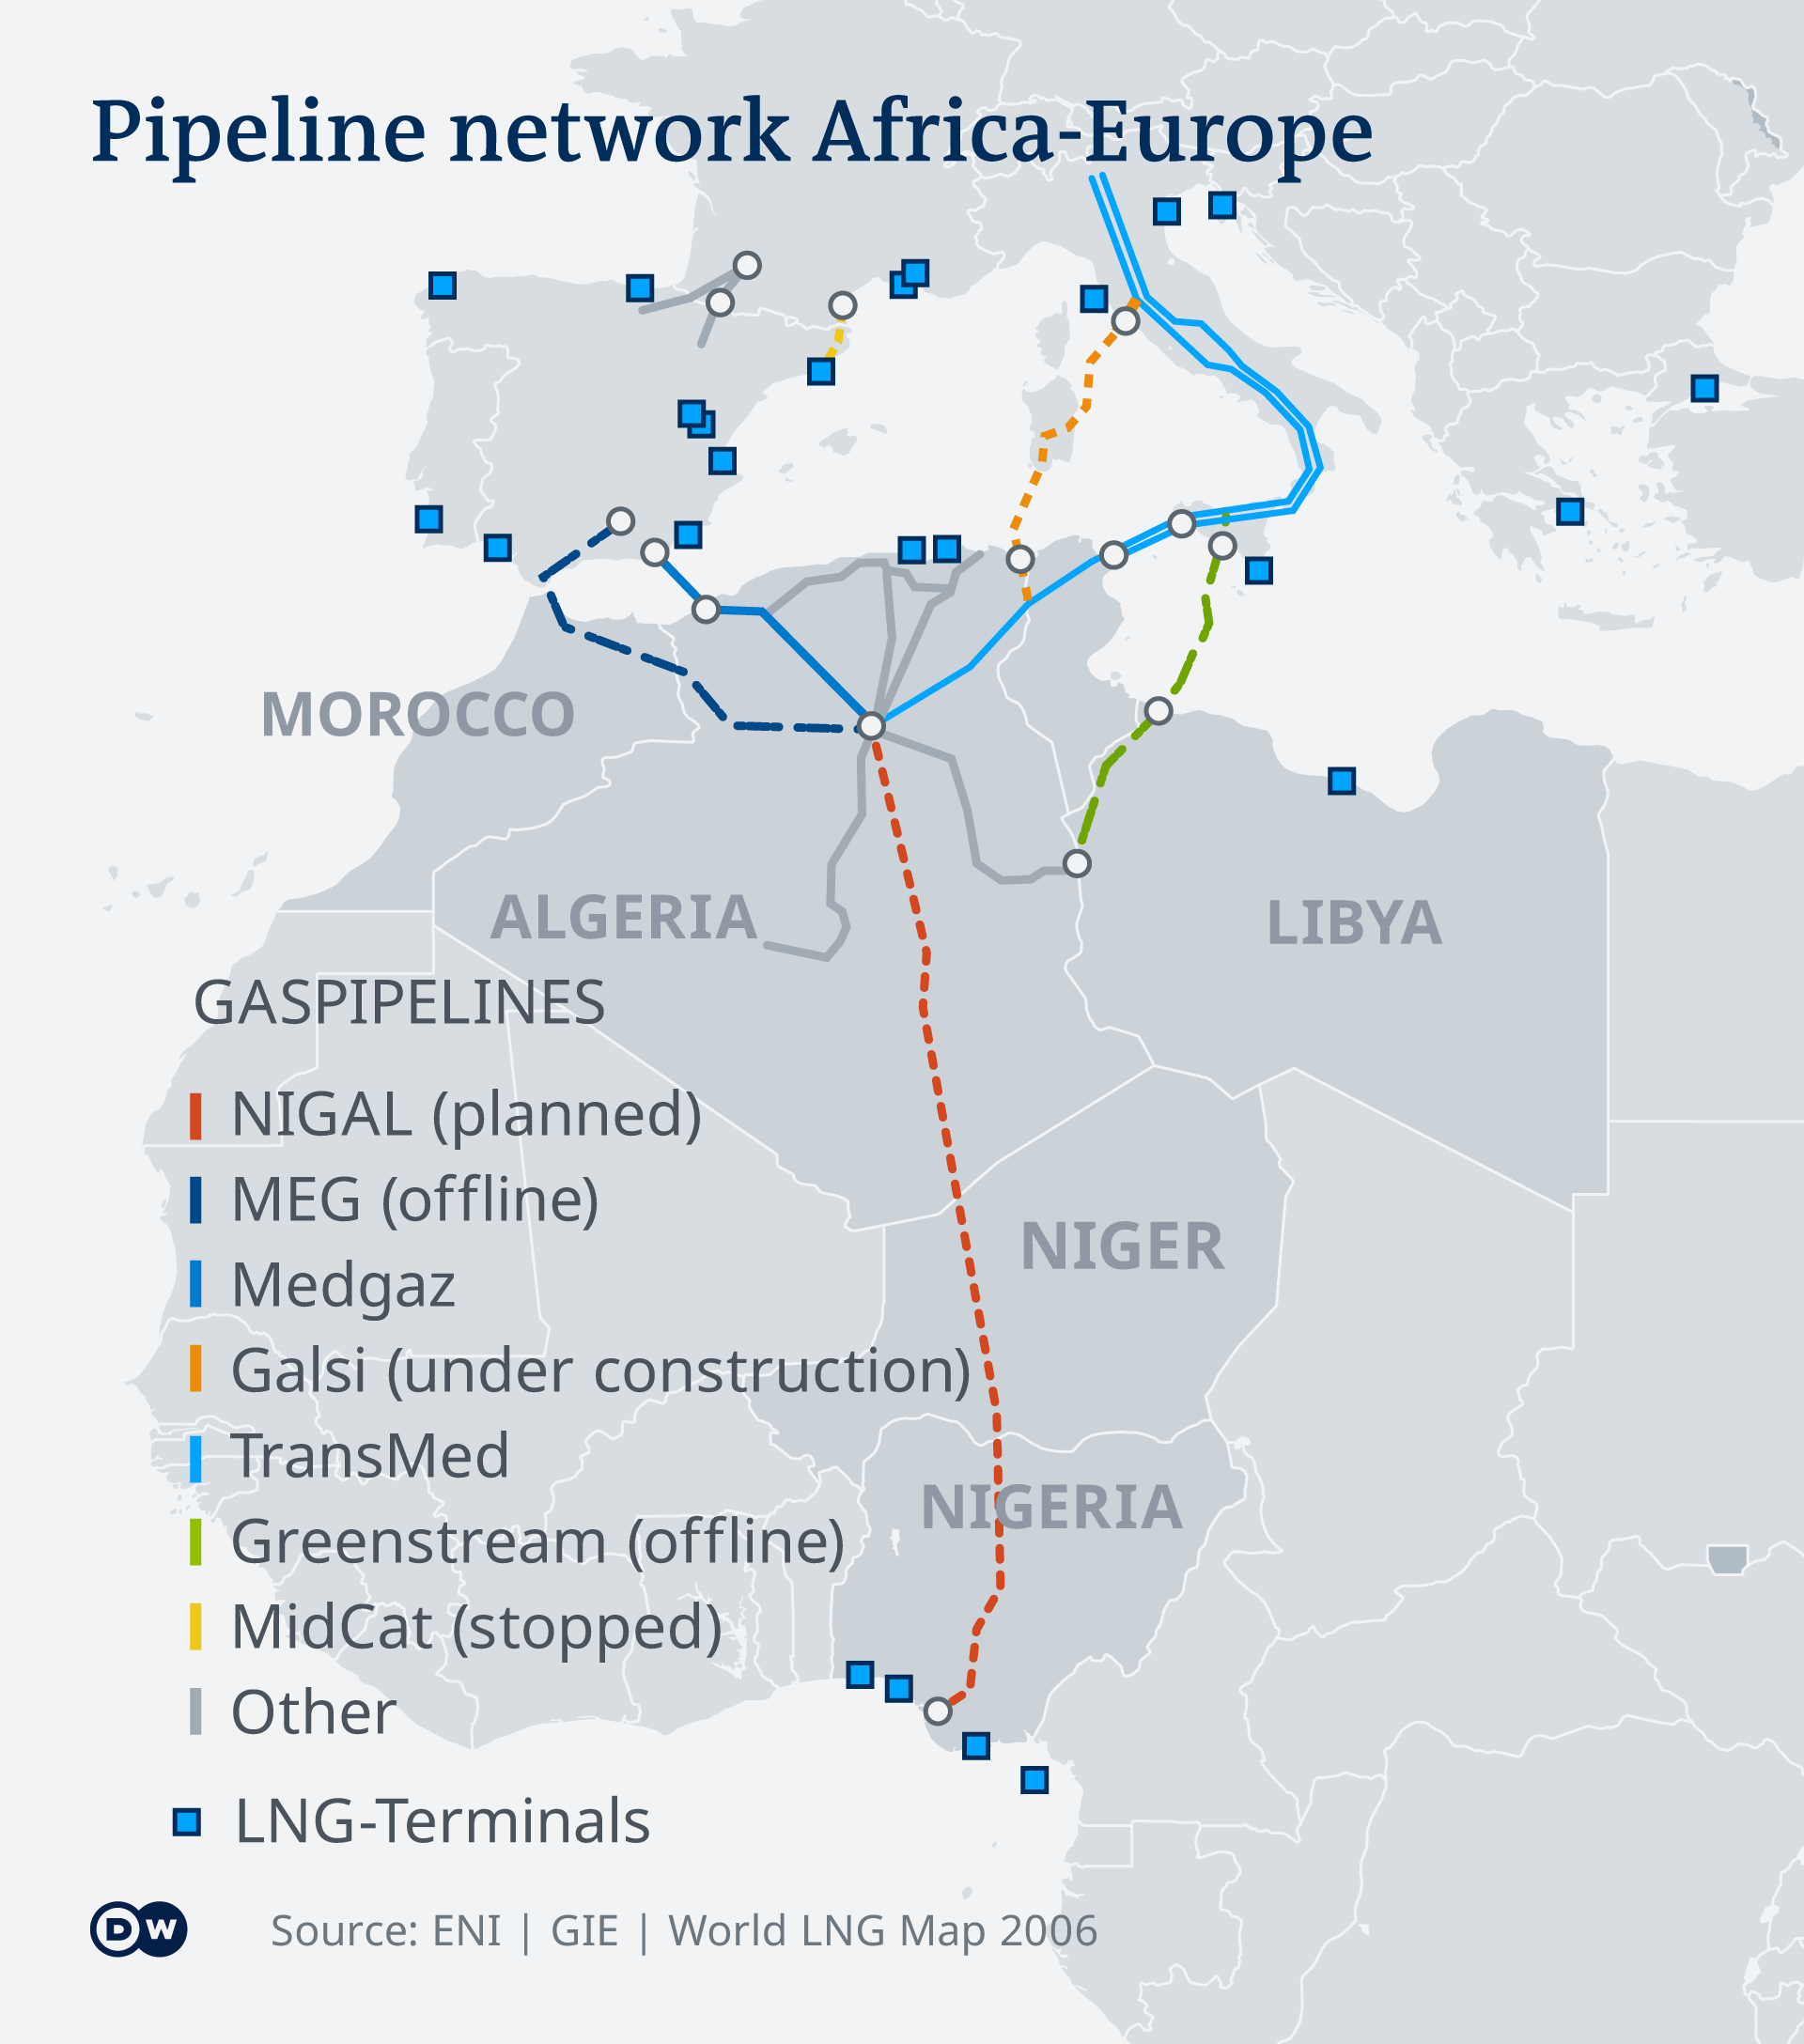 Infographic showing the Africa-Europe pipeline network